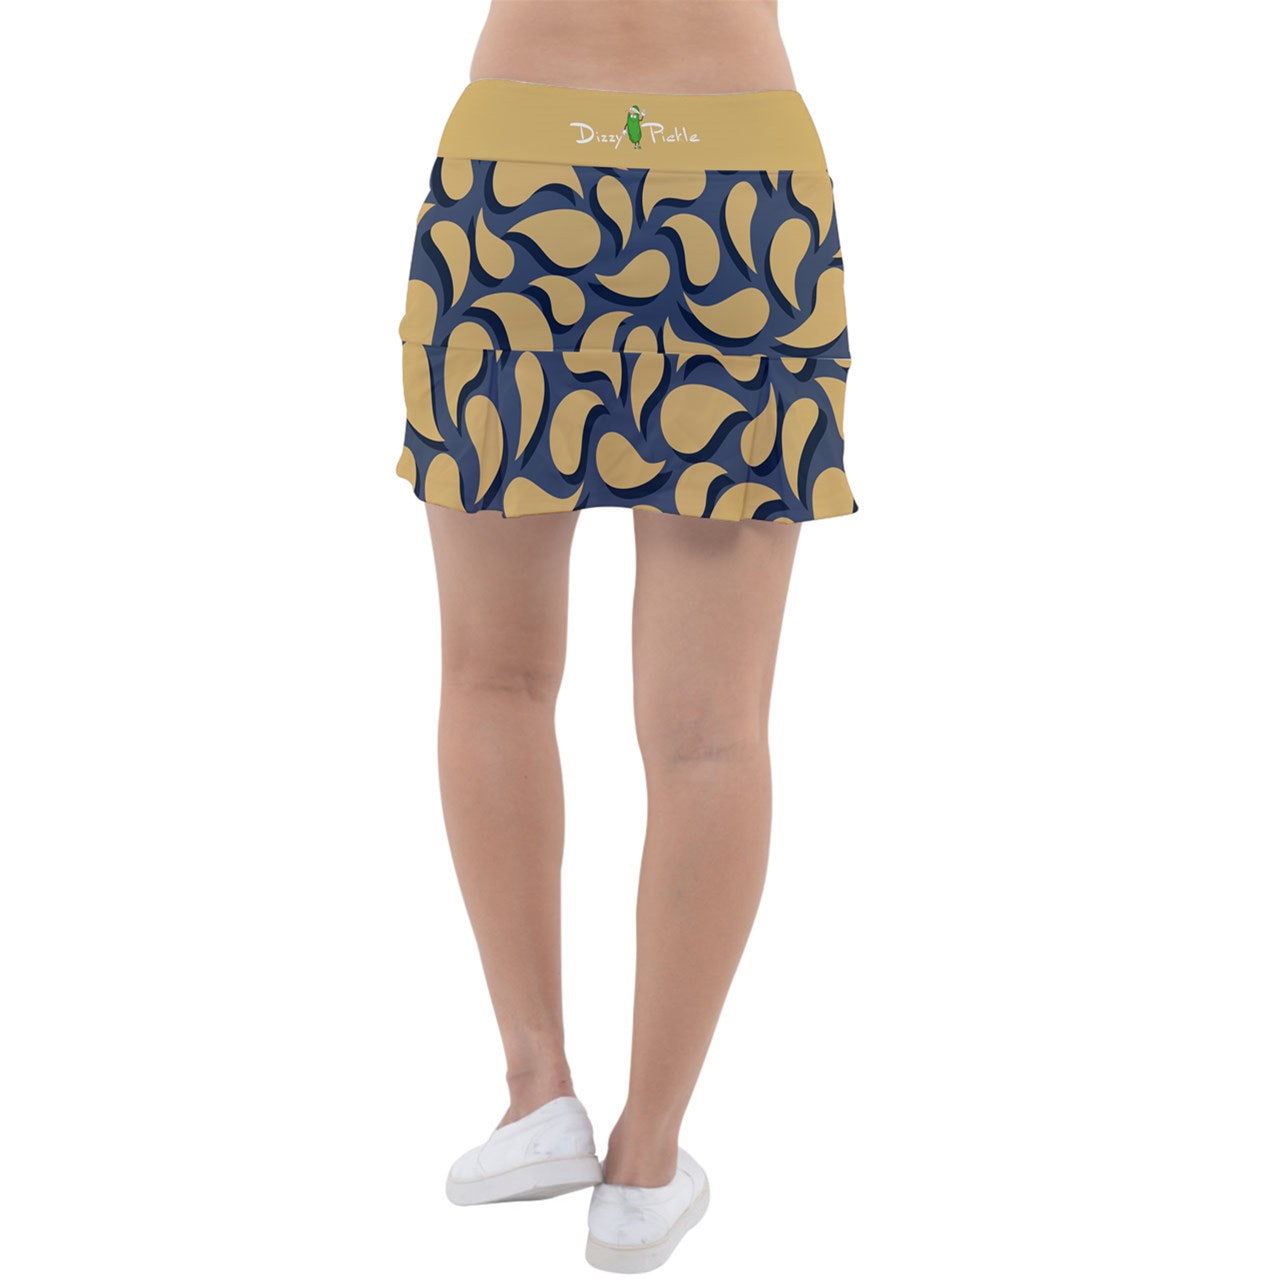 Dizzy Pickle Lesley Paisley Women's Pickleball Classic Pleated Skort Coordinating Patterned Inner Shorts Pockets Gold